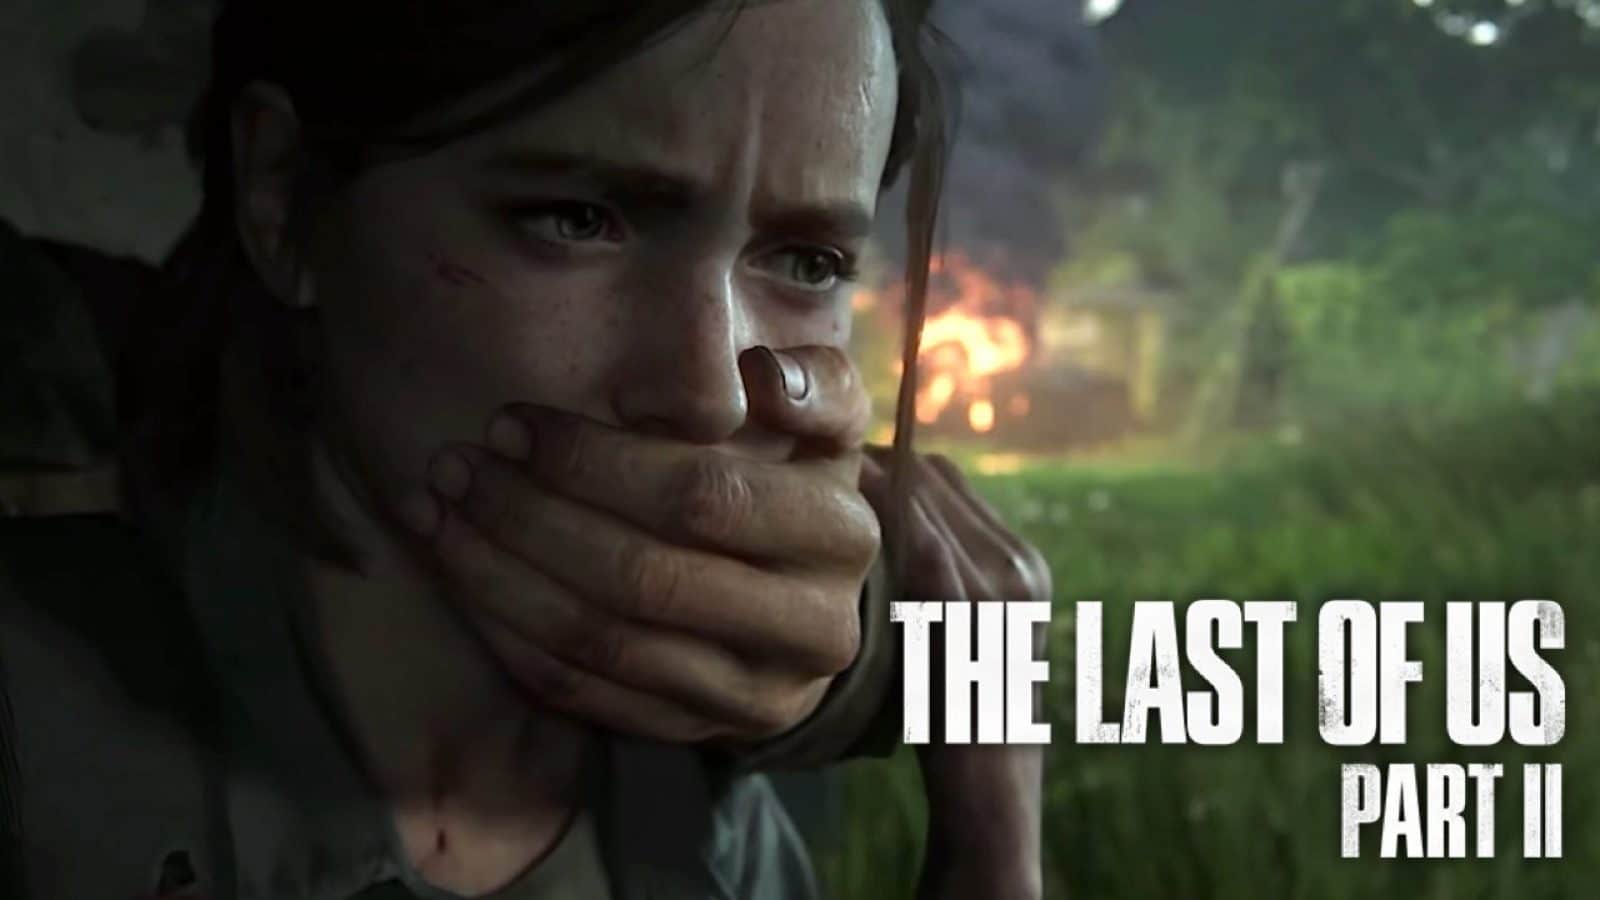 The Last Of Us Part 2 , PlayStation, PS4, GamerSRD